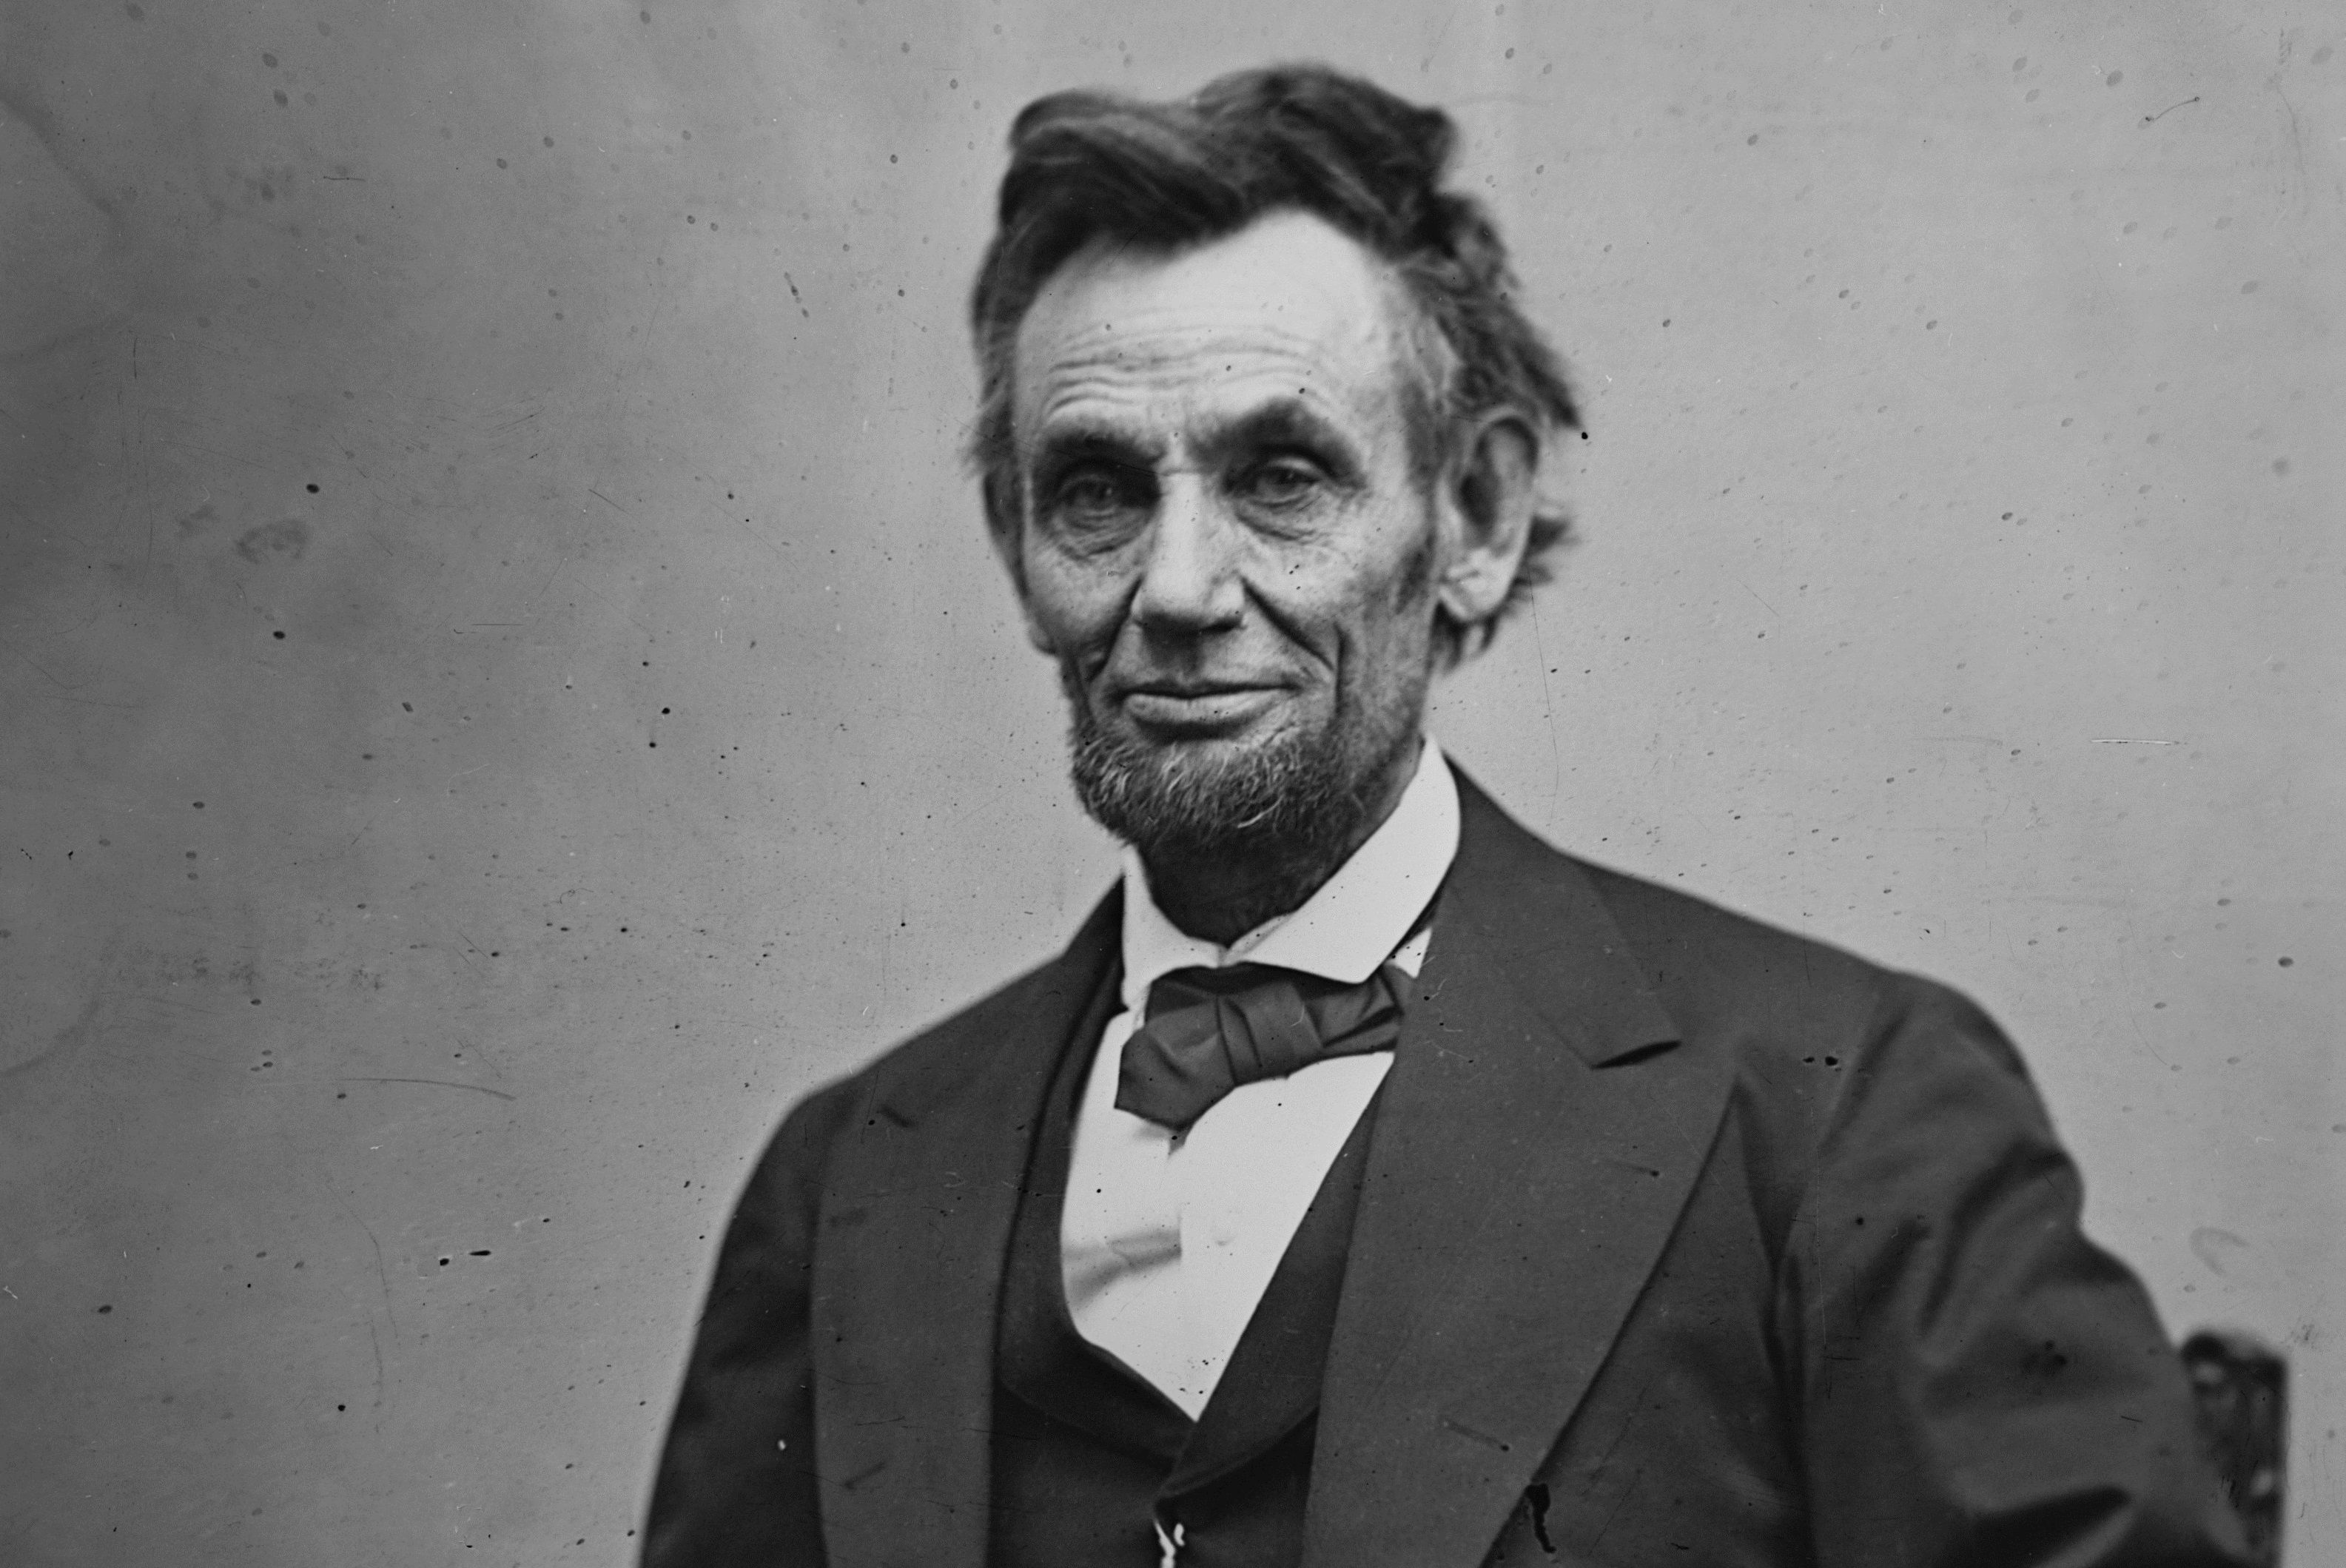 Abraham Lincoln photographed by Alexander Gardner in February 1865